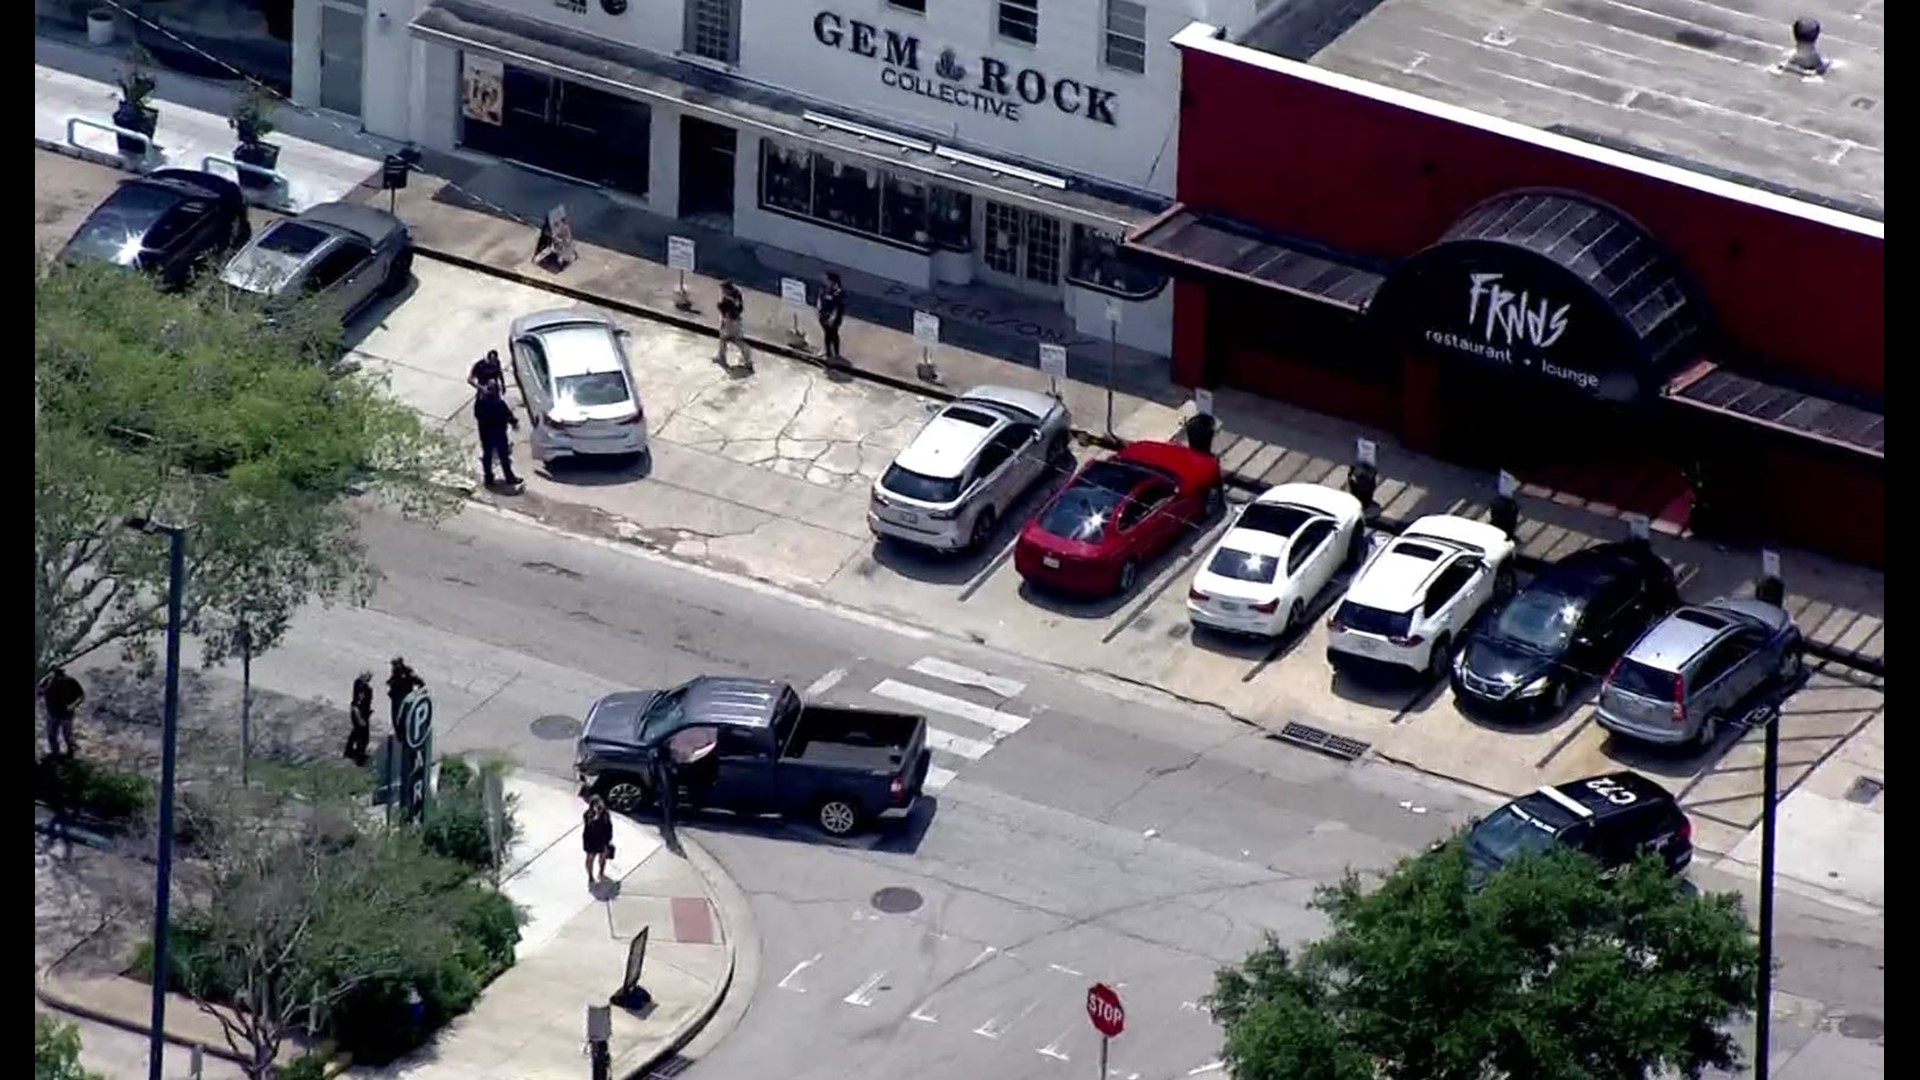 Houston police say the suspect they were chasing hit at least one other vehicle before he was taken into custody on University Blvd. near West Elm.